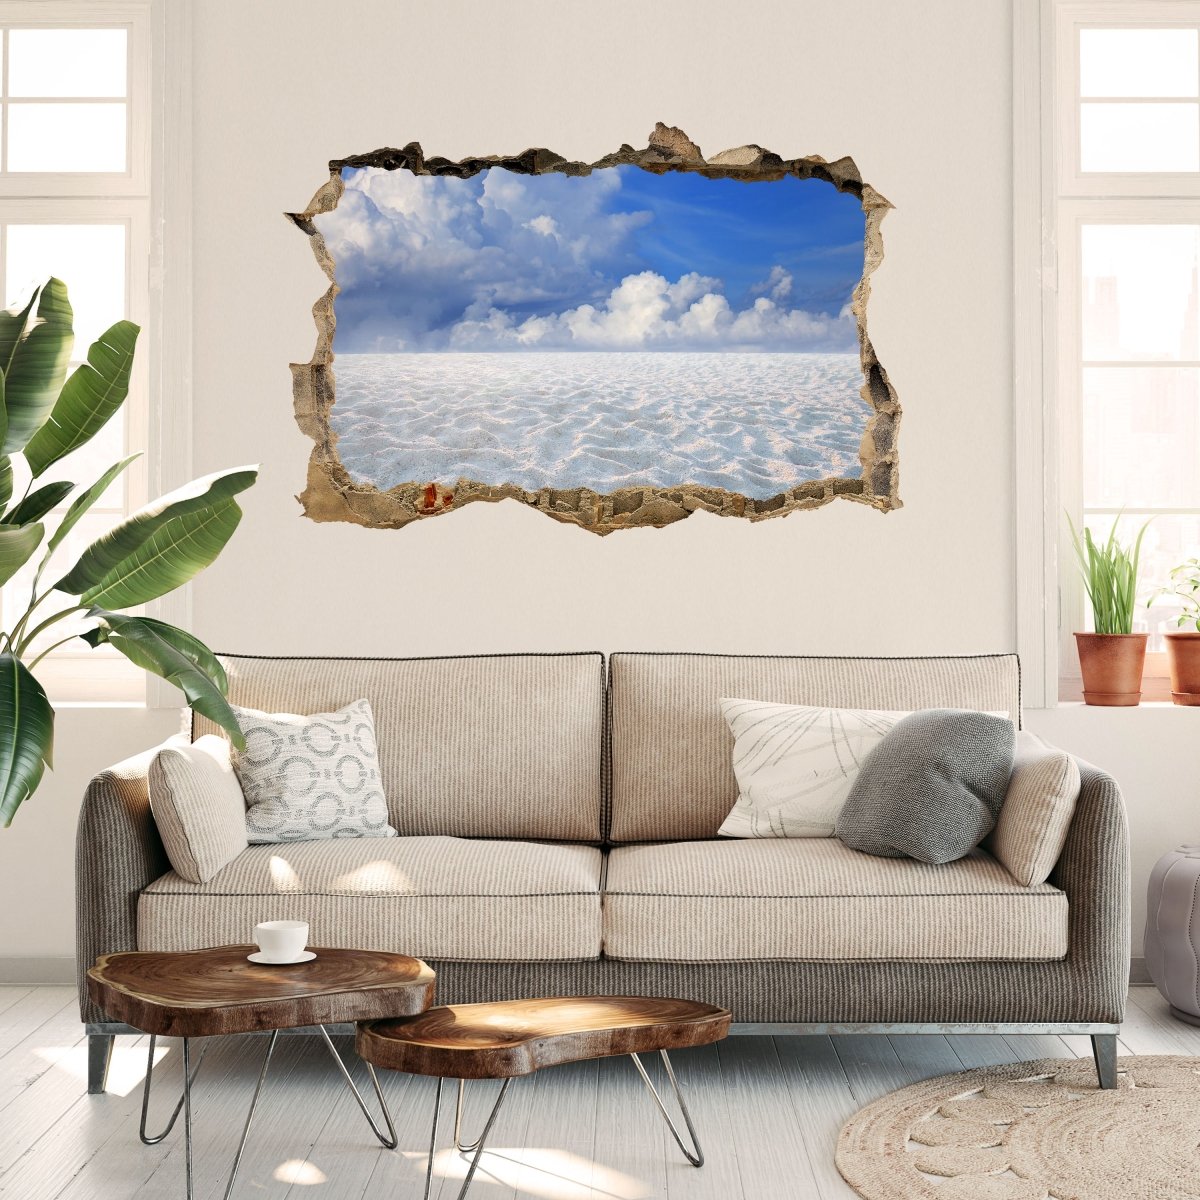 3D wall sticker Sandy landscape with a blue sky - Wall decal M0891